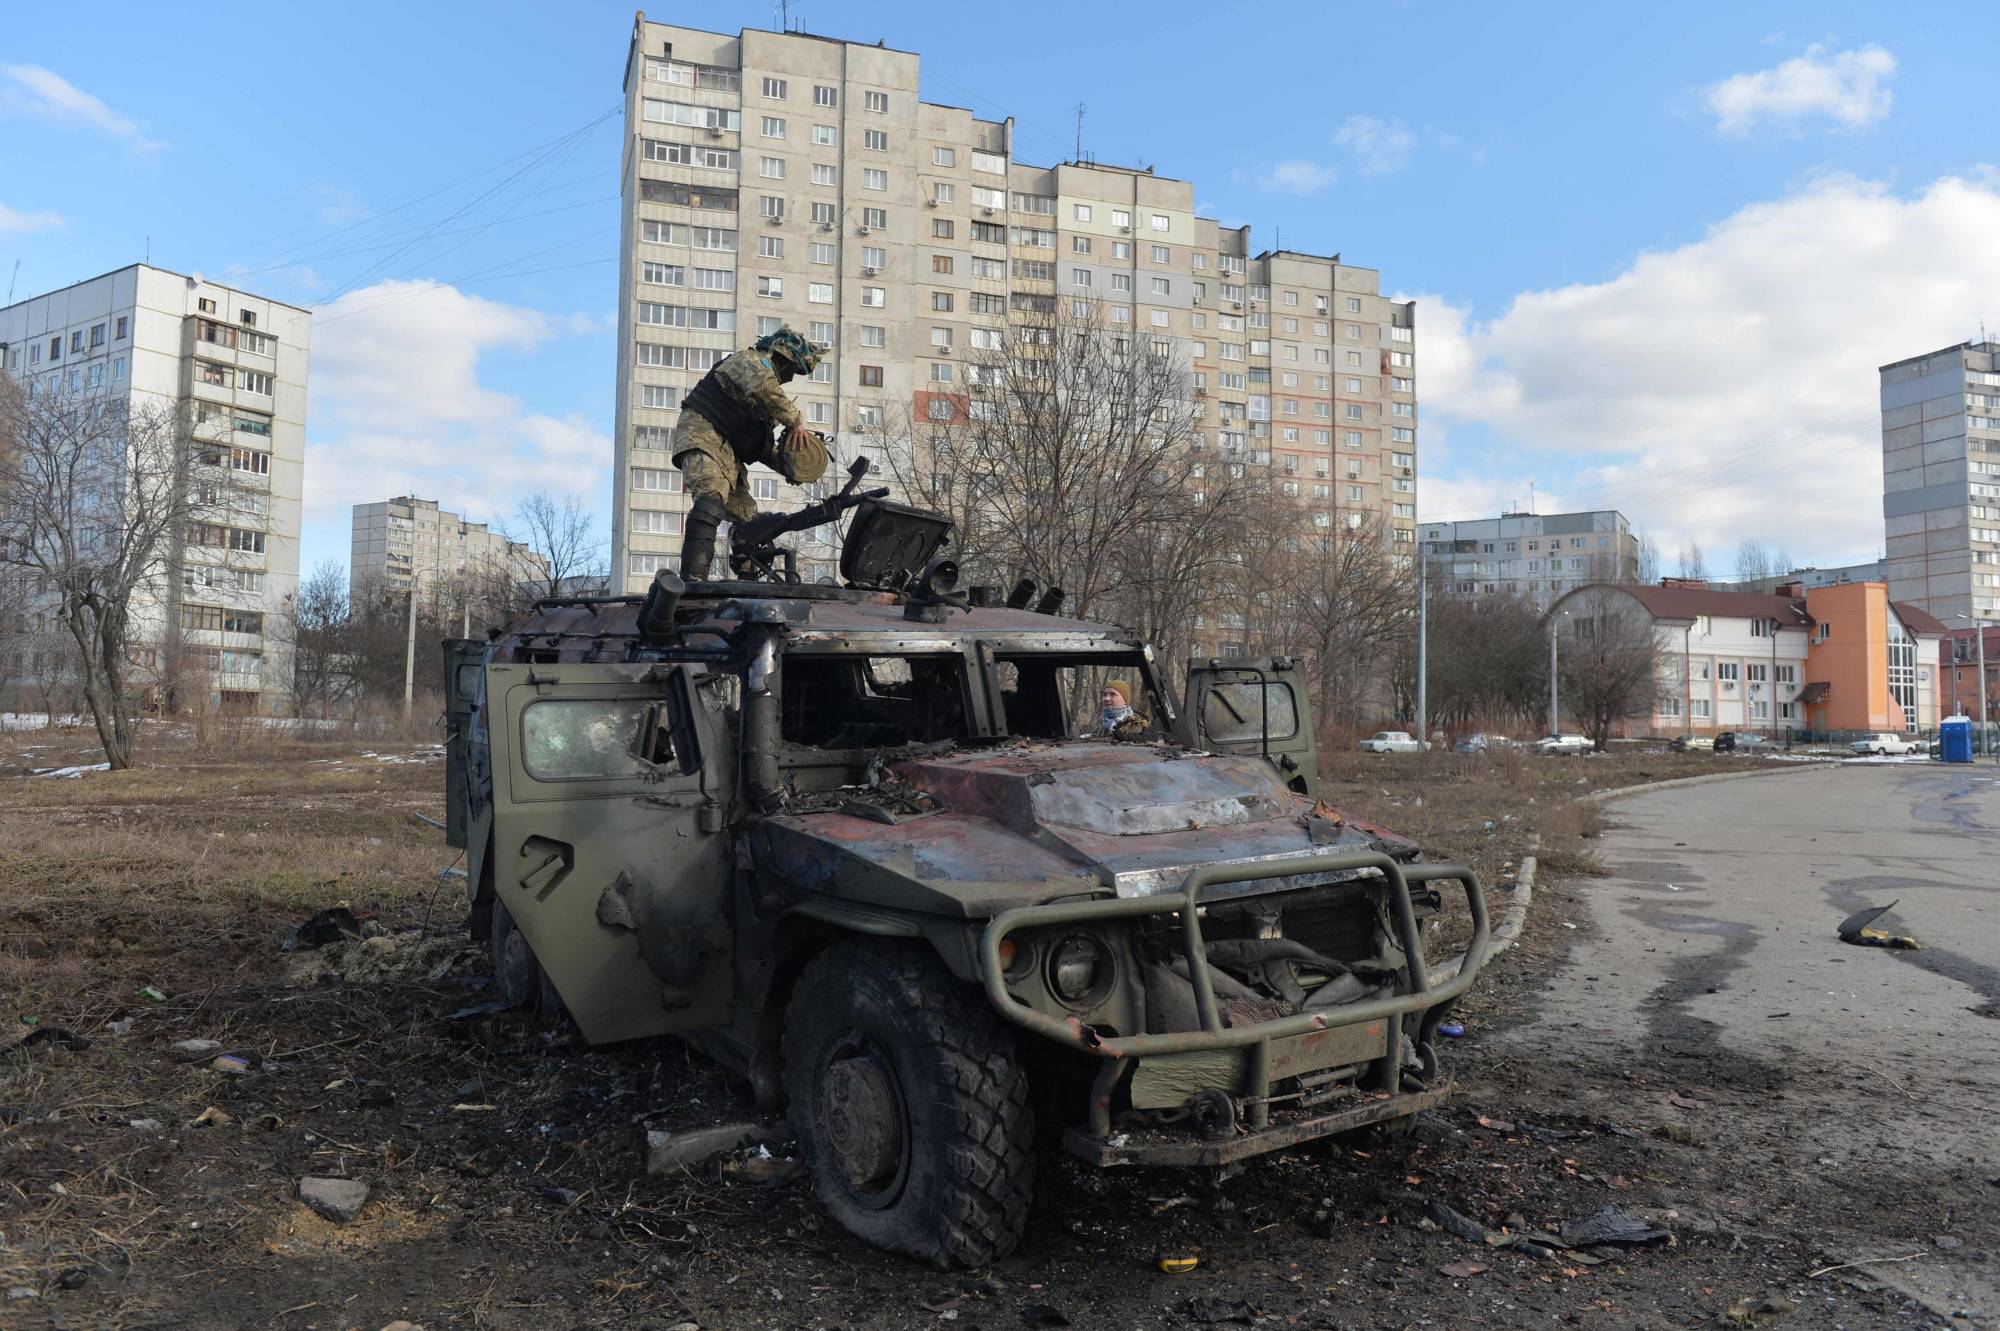 A Ukrainian Territorial Defense fighter examines a destroyed Russian infantry mobility vehicle GAZ Tigr after the fight in Kharkiv